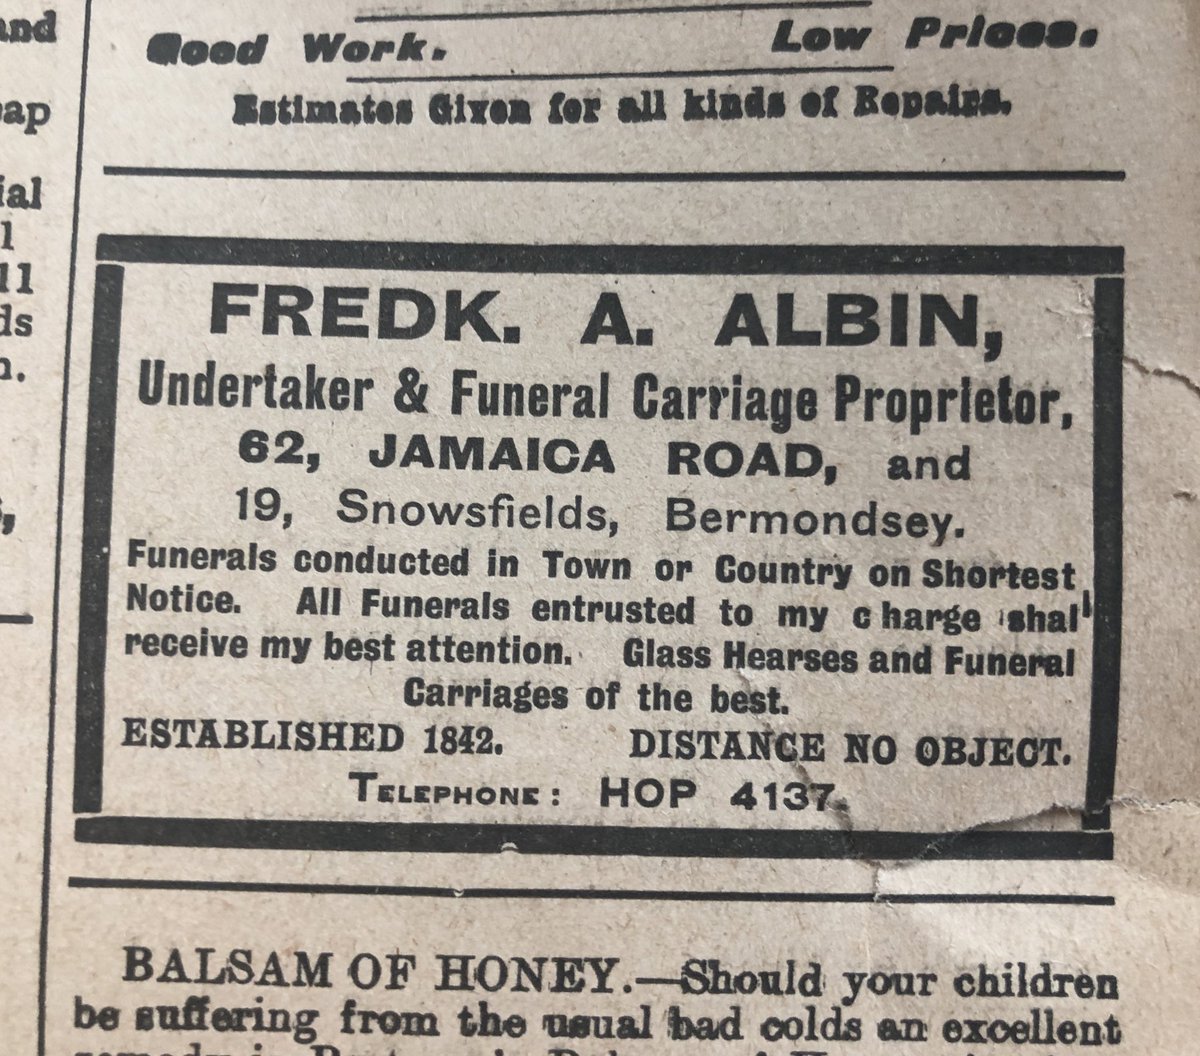 One firm advertising in 1910 and still very much on the local scene